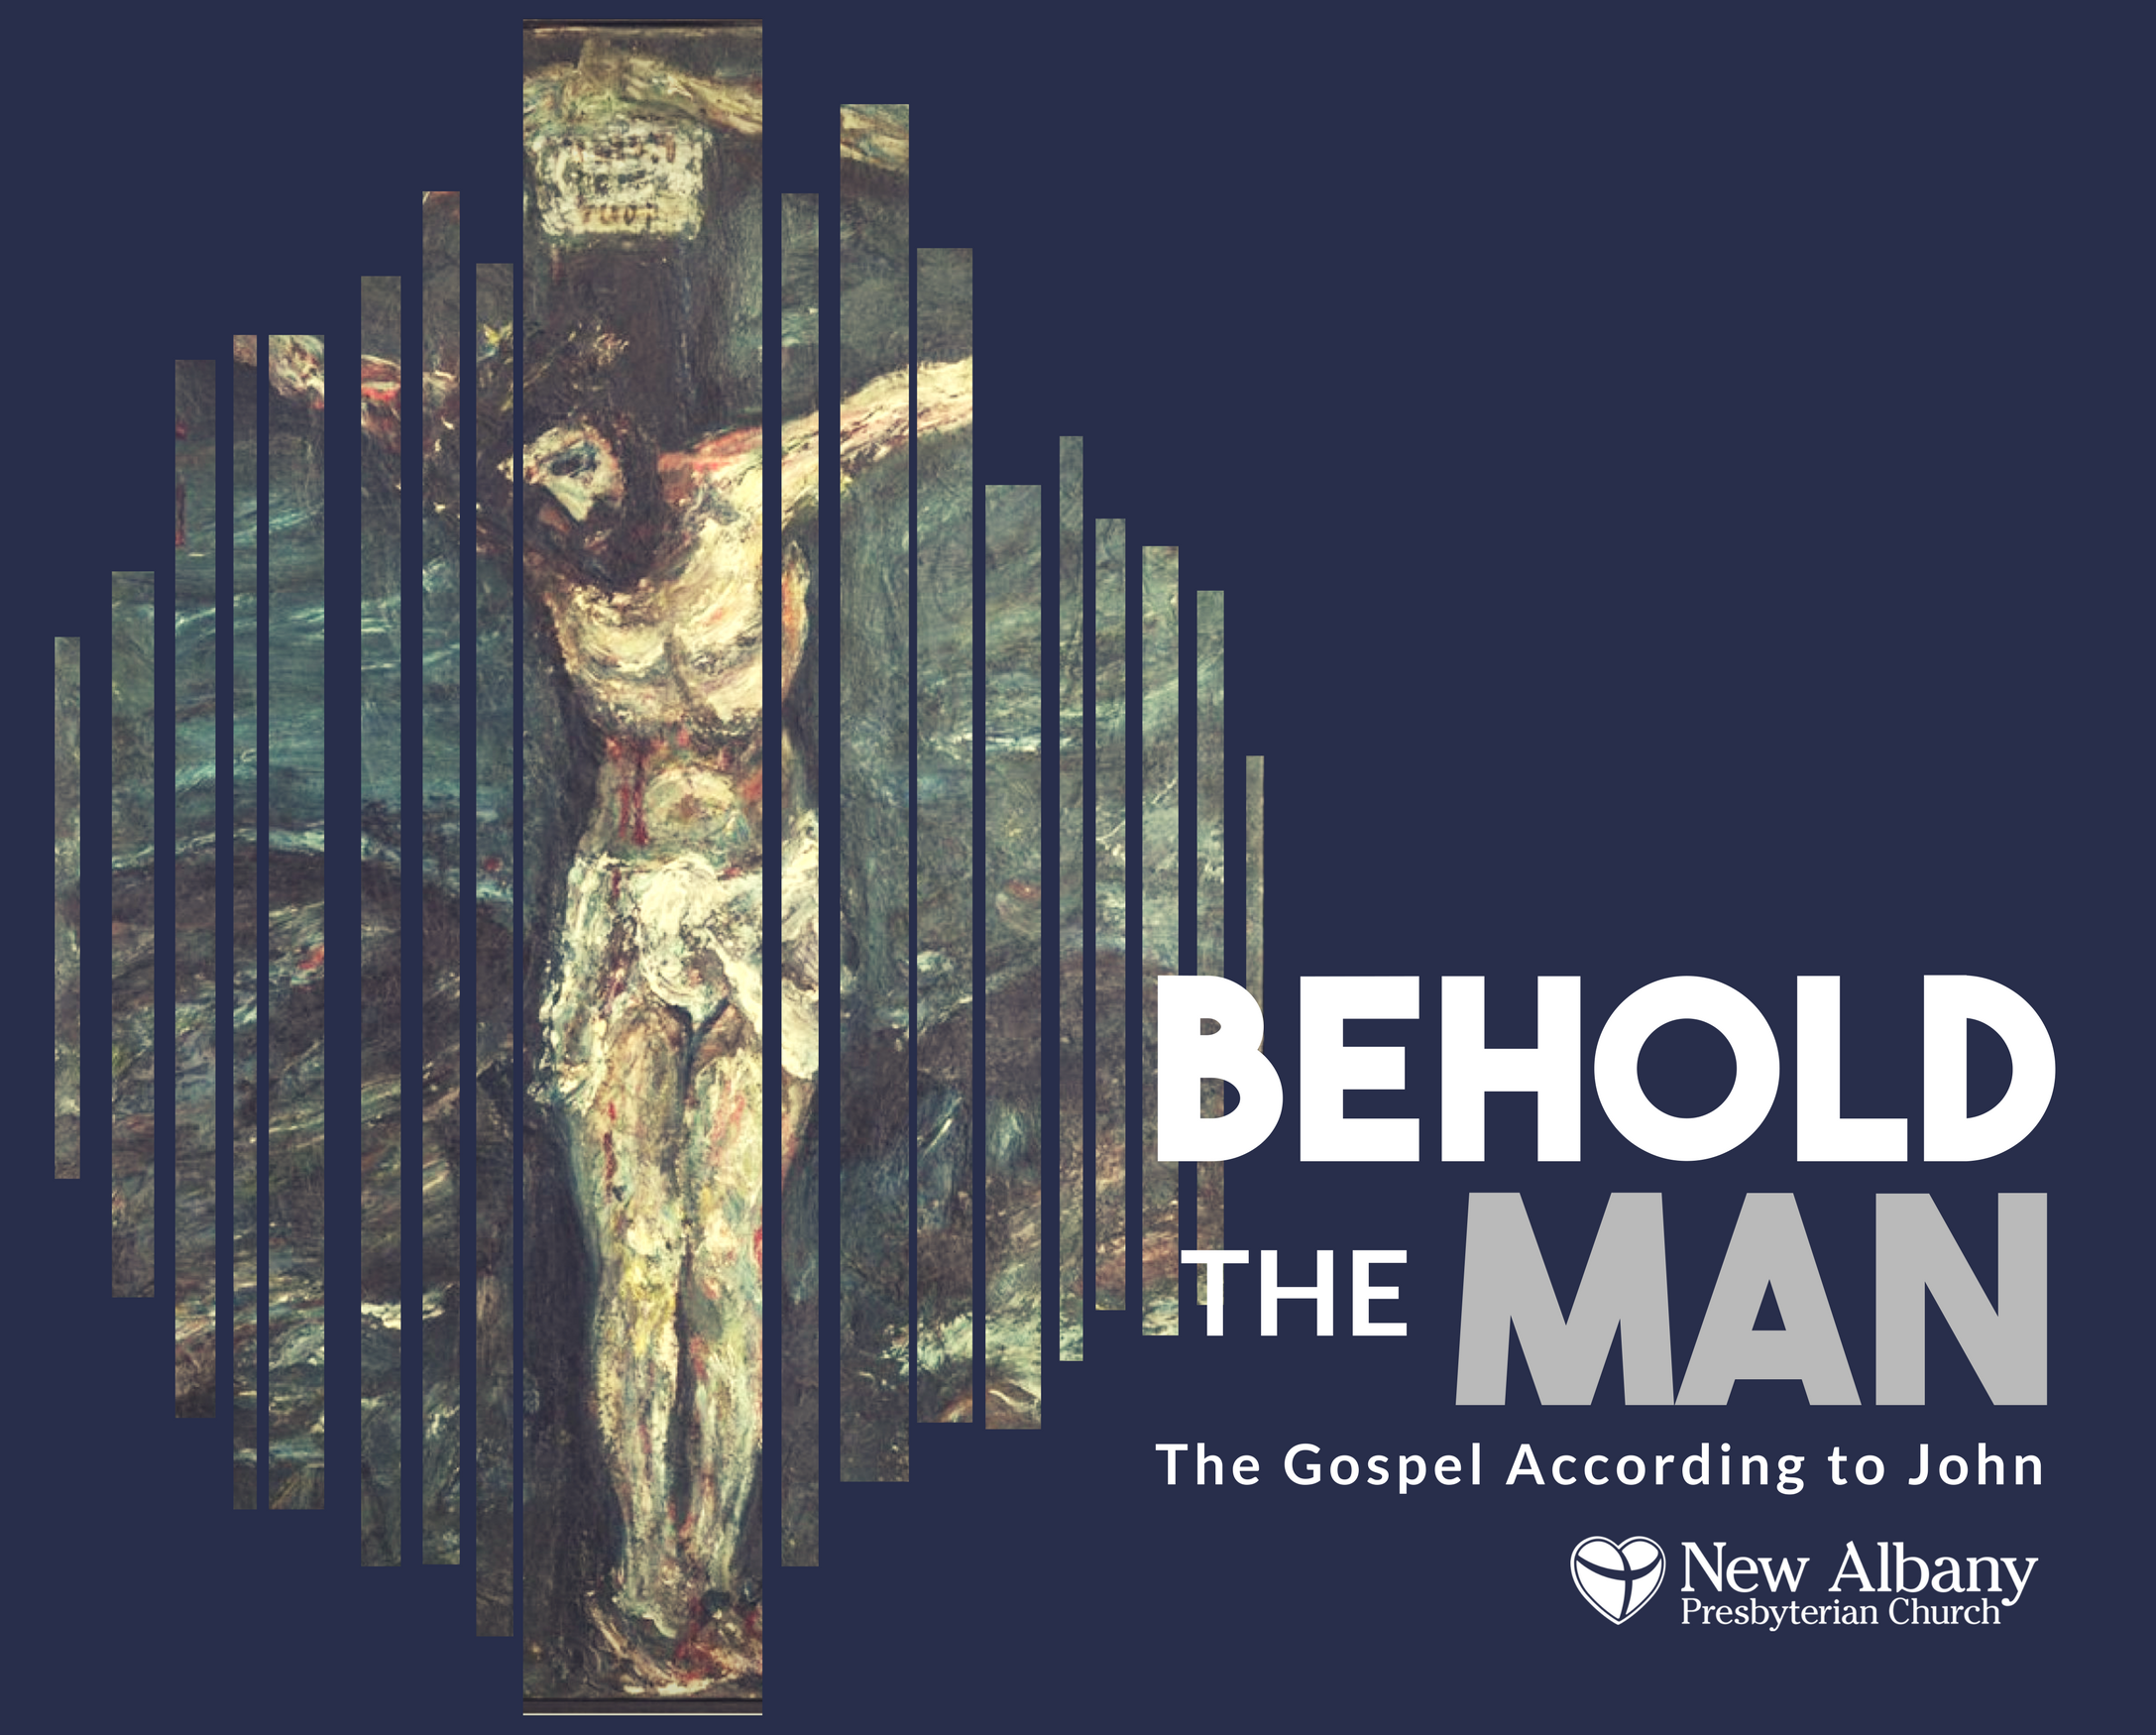 Behold the Man: Believing in Jesus